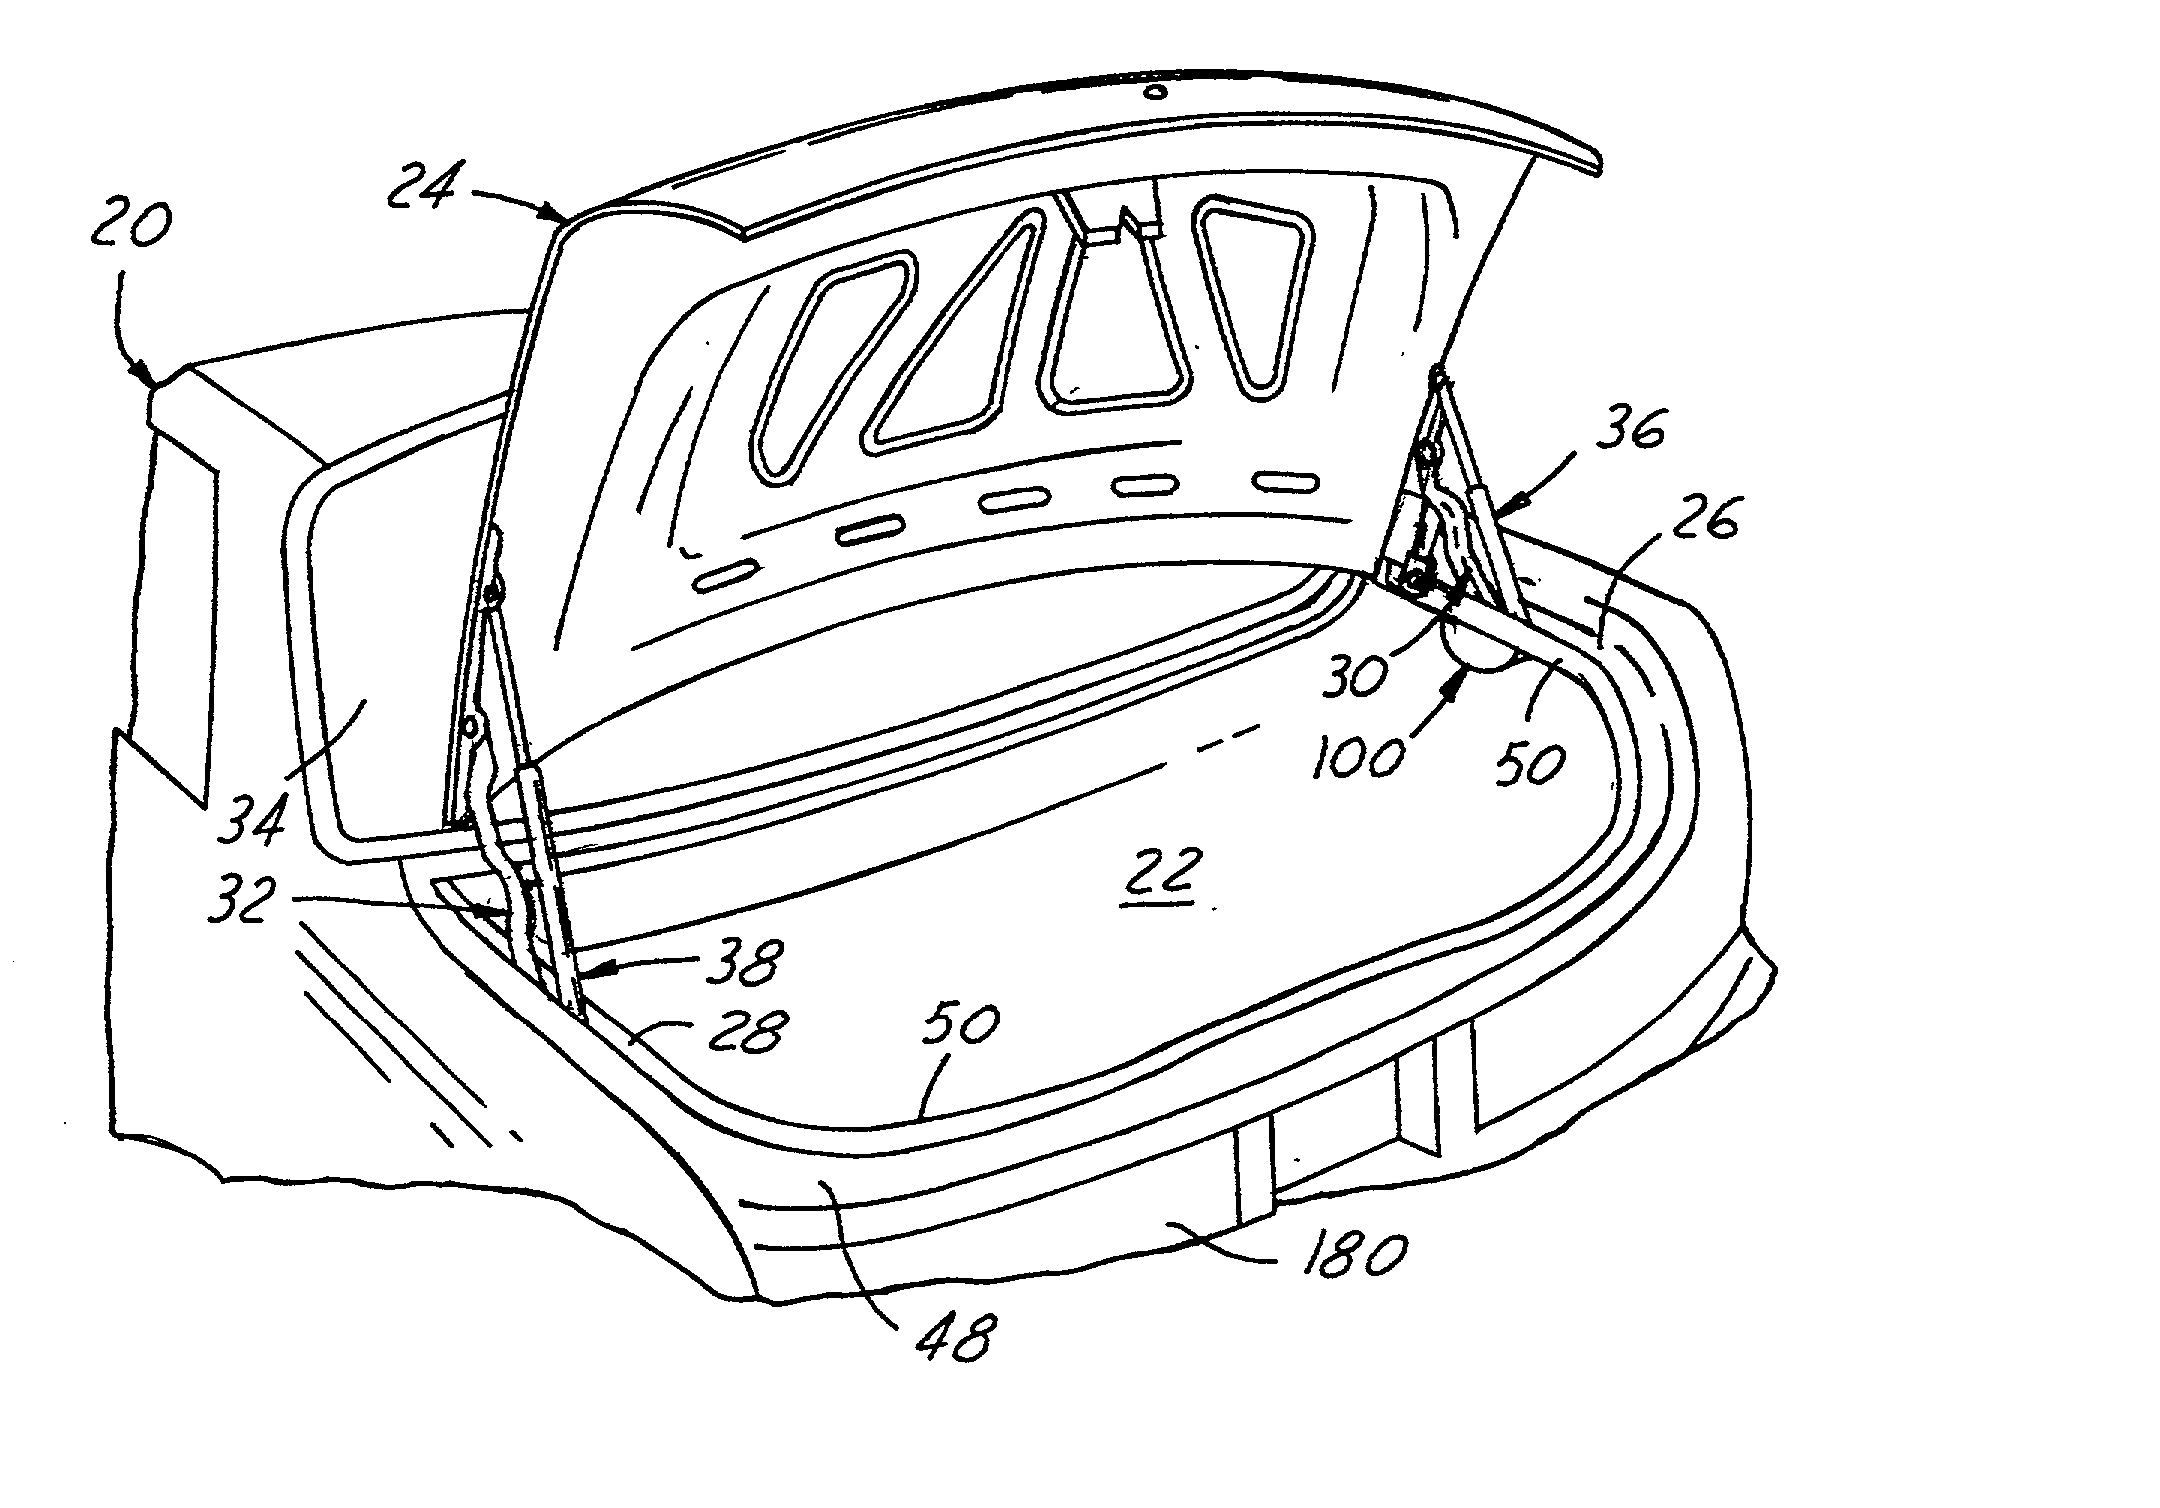 Power actuating system for four-bar hinge articulated vehicle closure element field of the invention